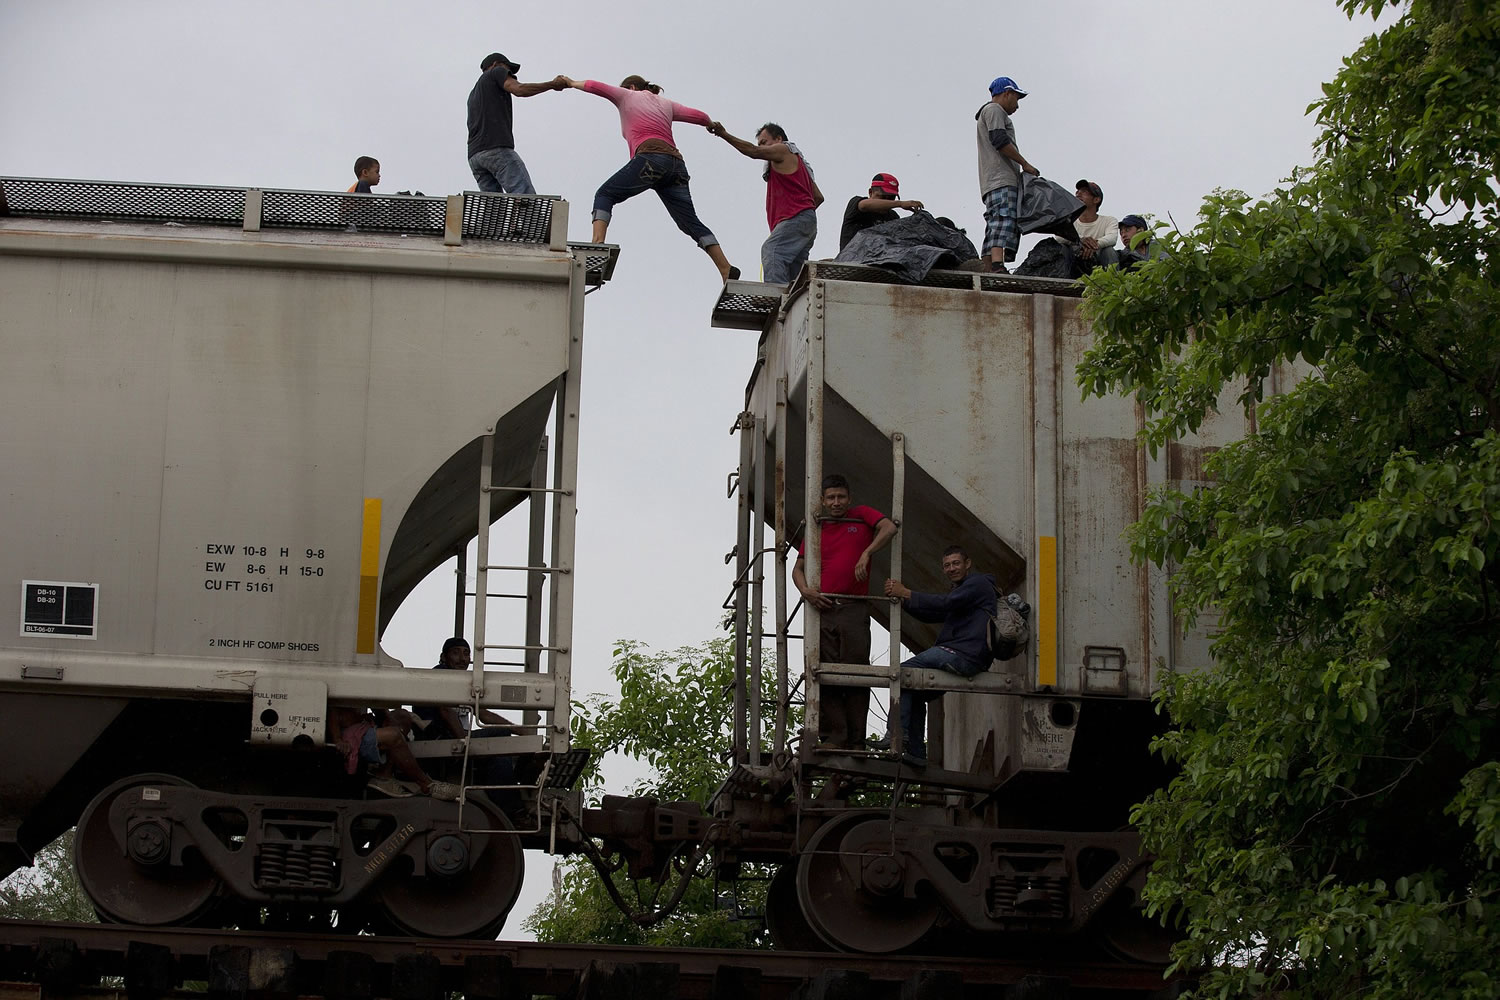 A woman is helped from one boxcar to another, as Central American migrants wait atop the train they were riding north, hours after it suffered a minor  derailment in a remote wooded area outside Reforma de Pineda, Chiapas state, Mexico.